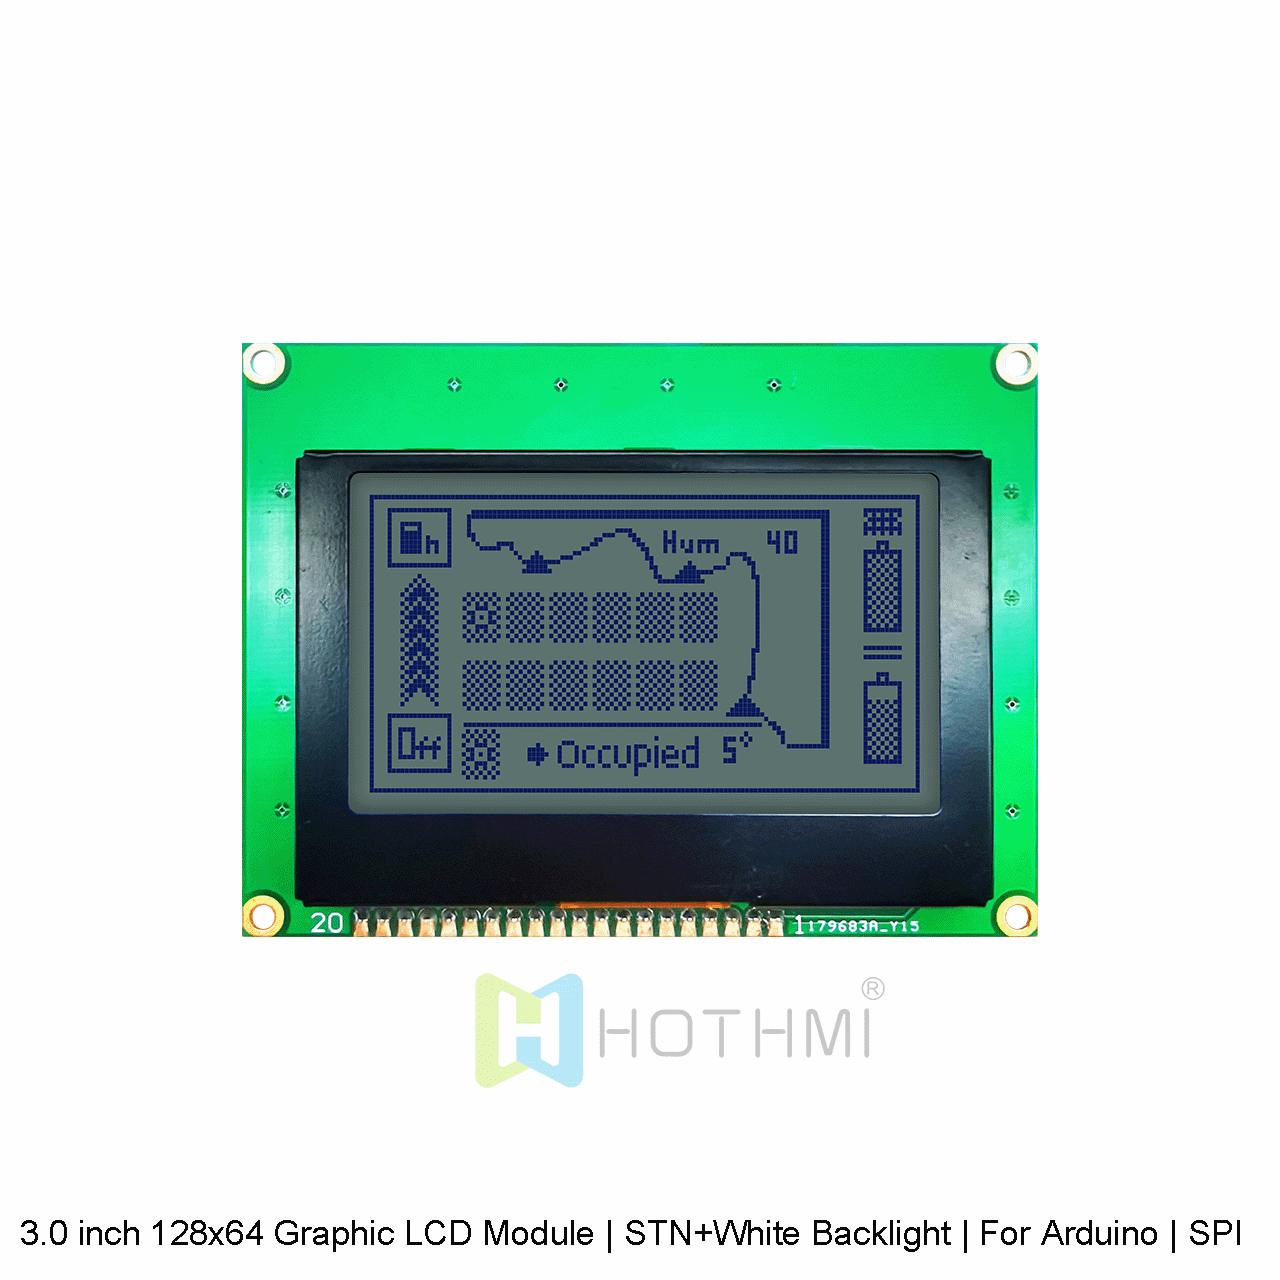 3.0 inch 128x64 Graphic LCD Module | STN+White Backlight | For Arduino | SPI Interface | Gray Background Blue Graphic LCD